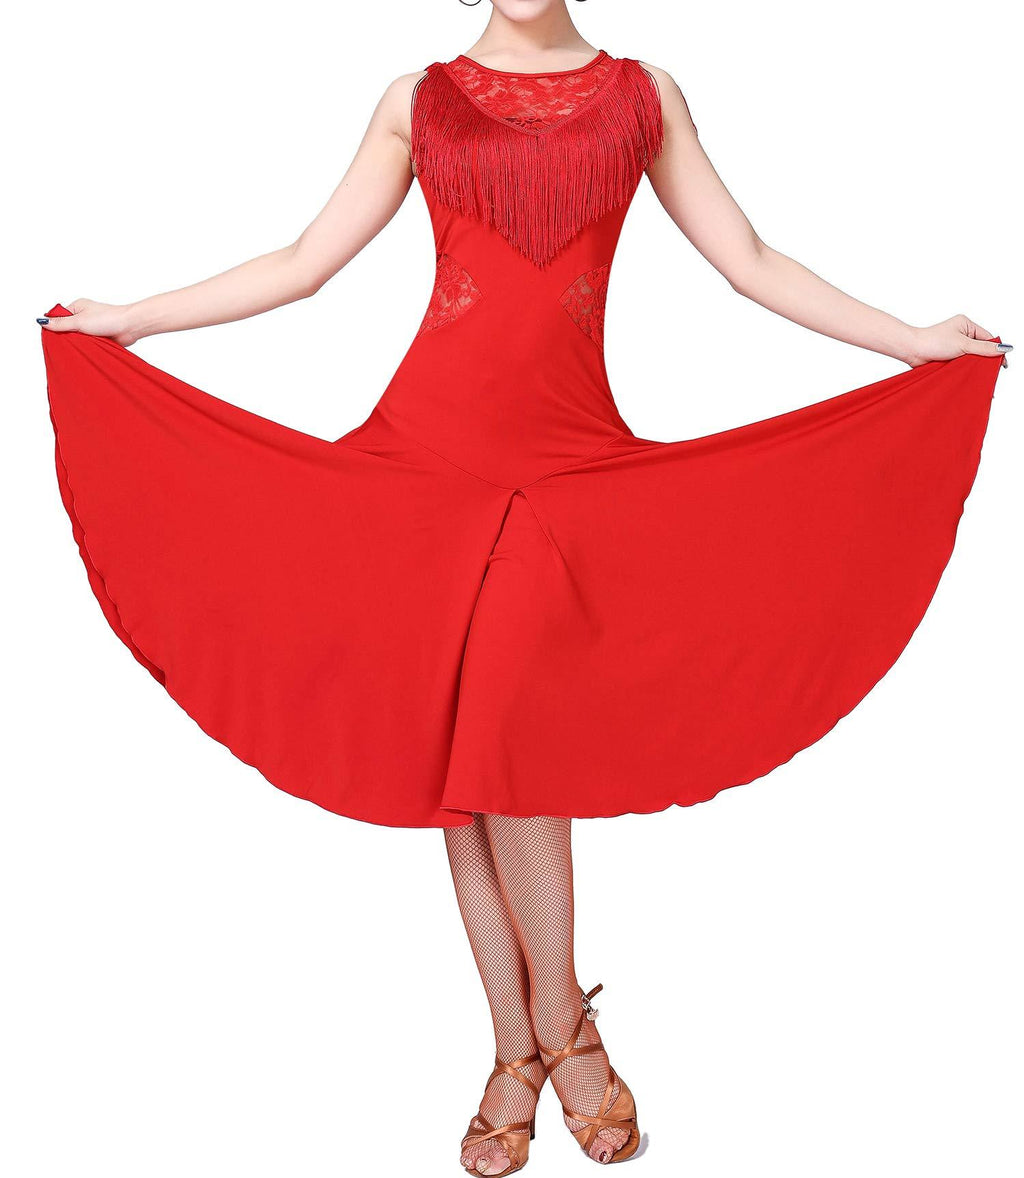 [AUSTRALIA] - Whitewed Lace Fringe Circular Latin Dance Routine Practice Dresses Wear Ladies X-Small Red 